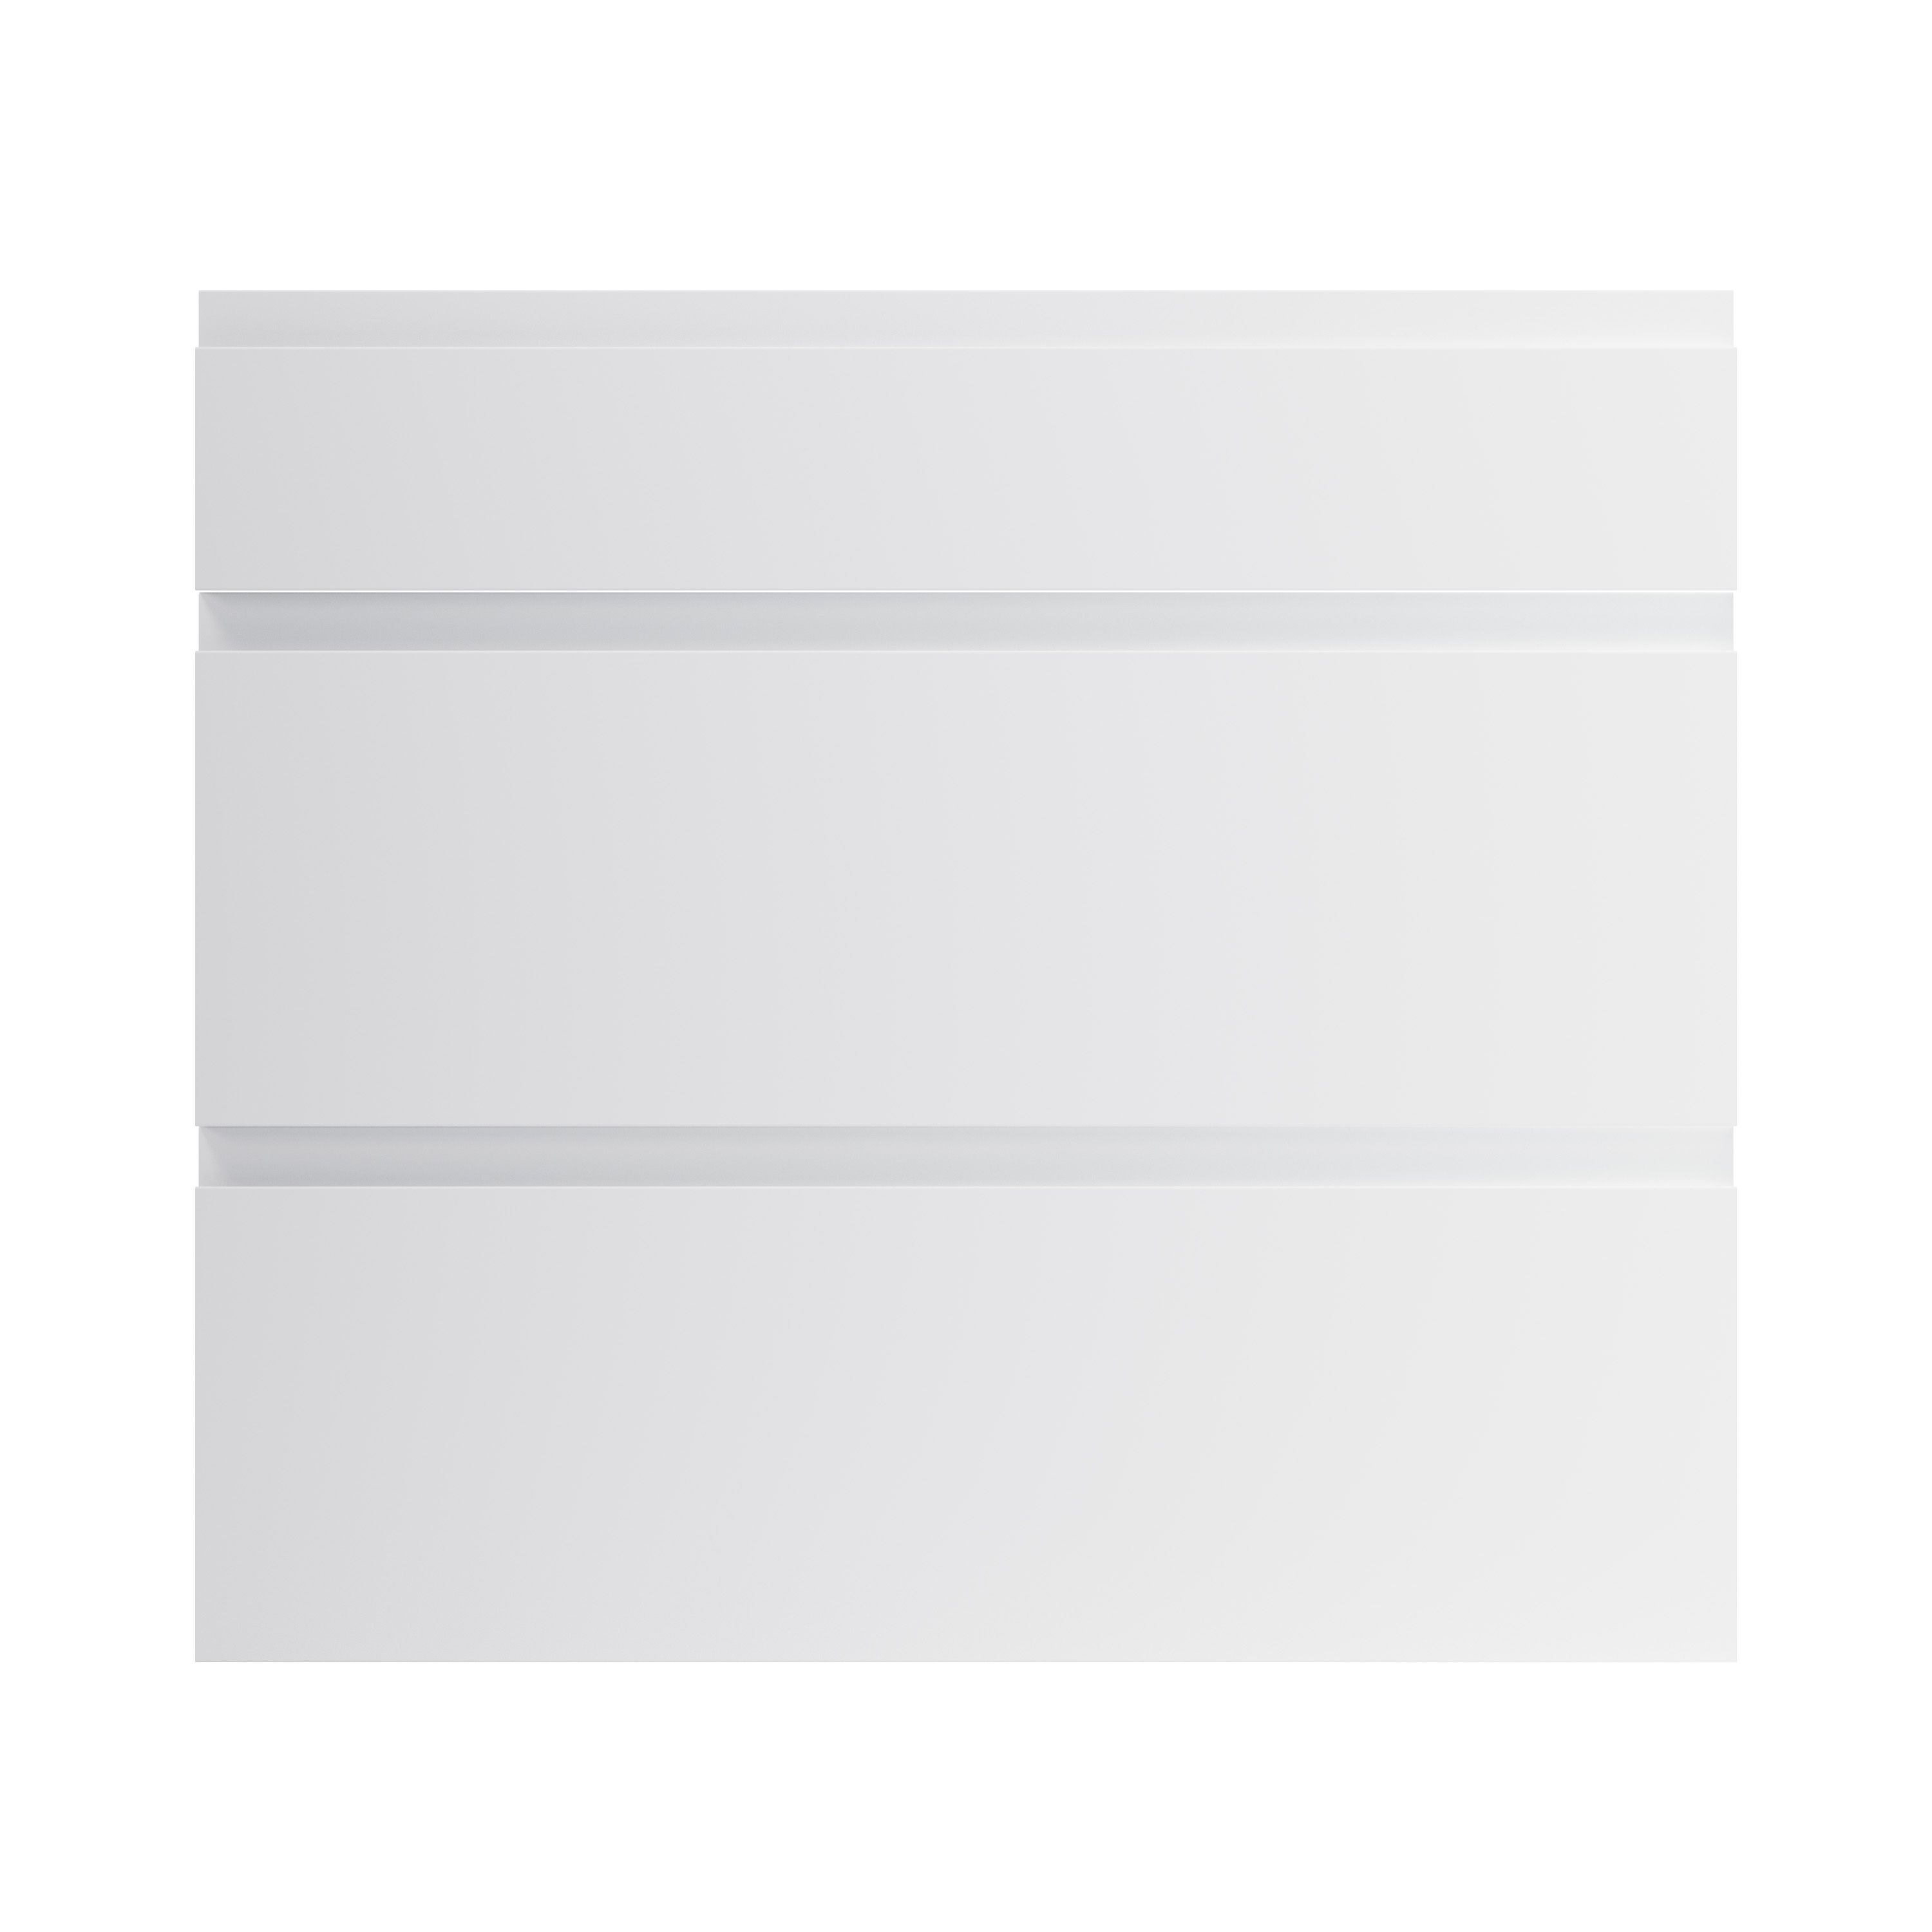 GoodHome Garcinia Gloss light grey integrated handle Drawer front (W)800mm, Pack of 3